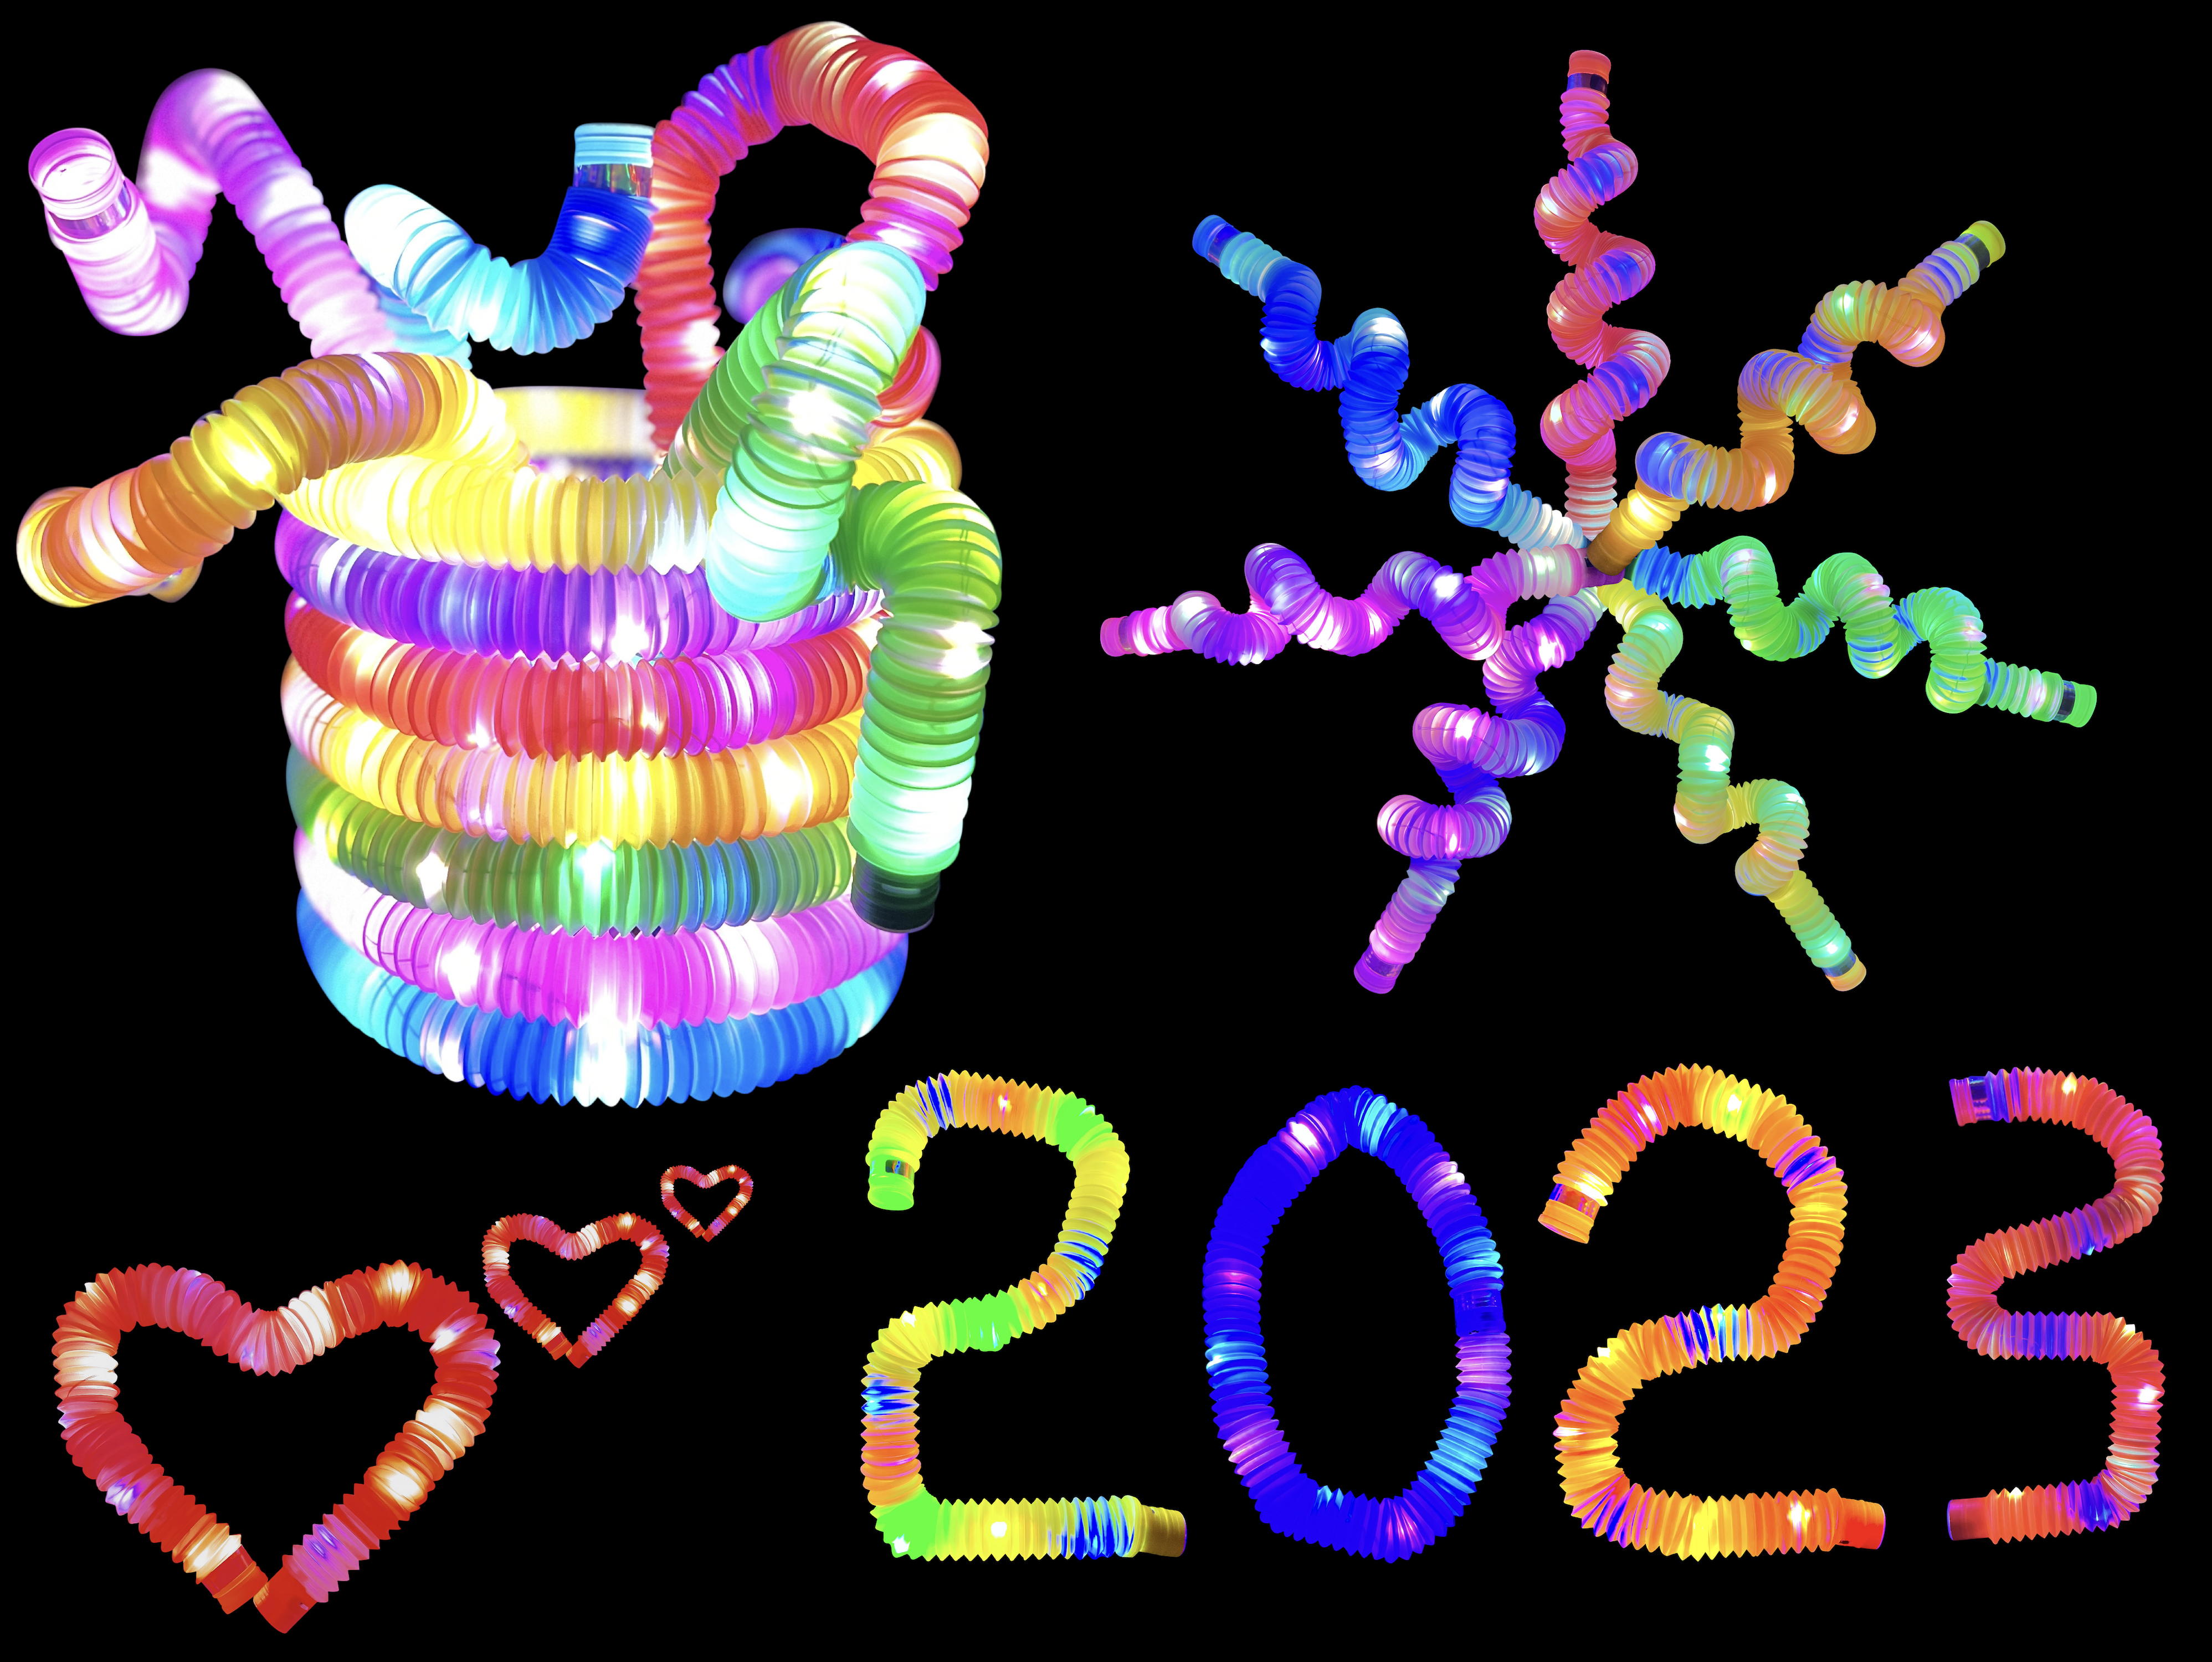 21 Pack LED Glow Tubes Halloween Party Favors Pop It Sticks Sensory Fidget Toy Light Up In The Dark Connectors for Bracelets, Pull And Stretch Toys Dance Disco Wedding Birthday Raves Concert Camping - image 1 of 7